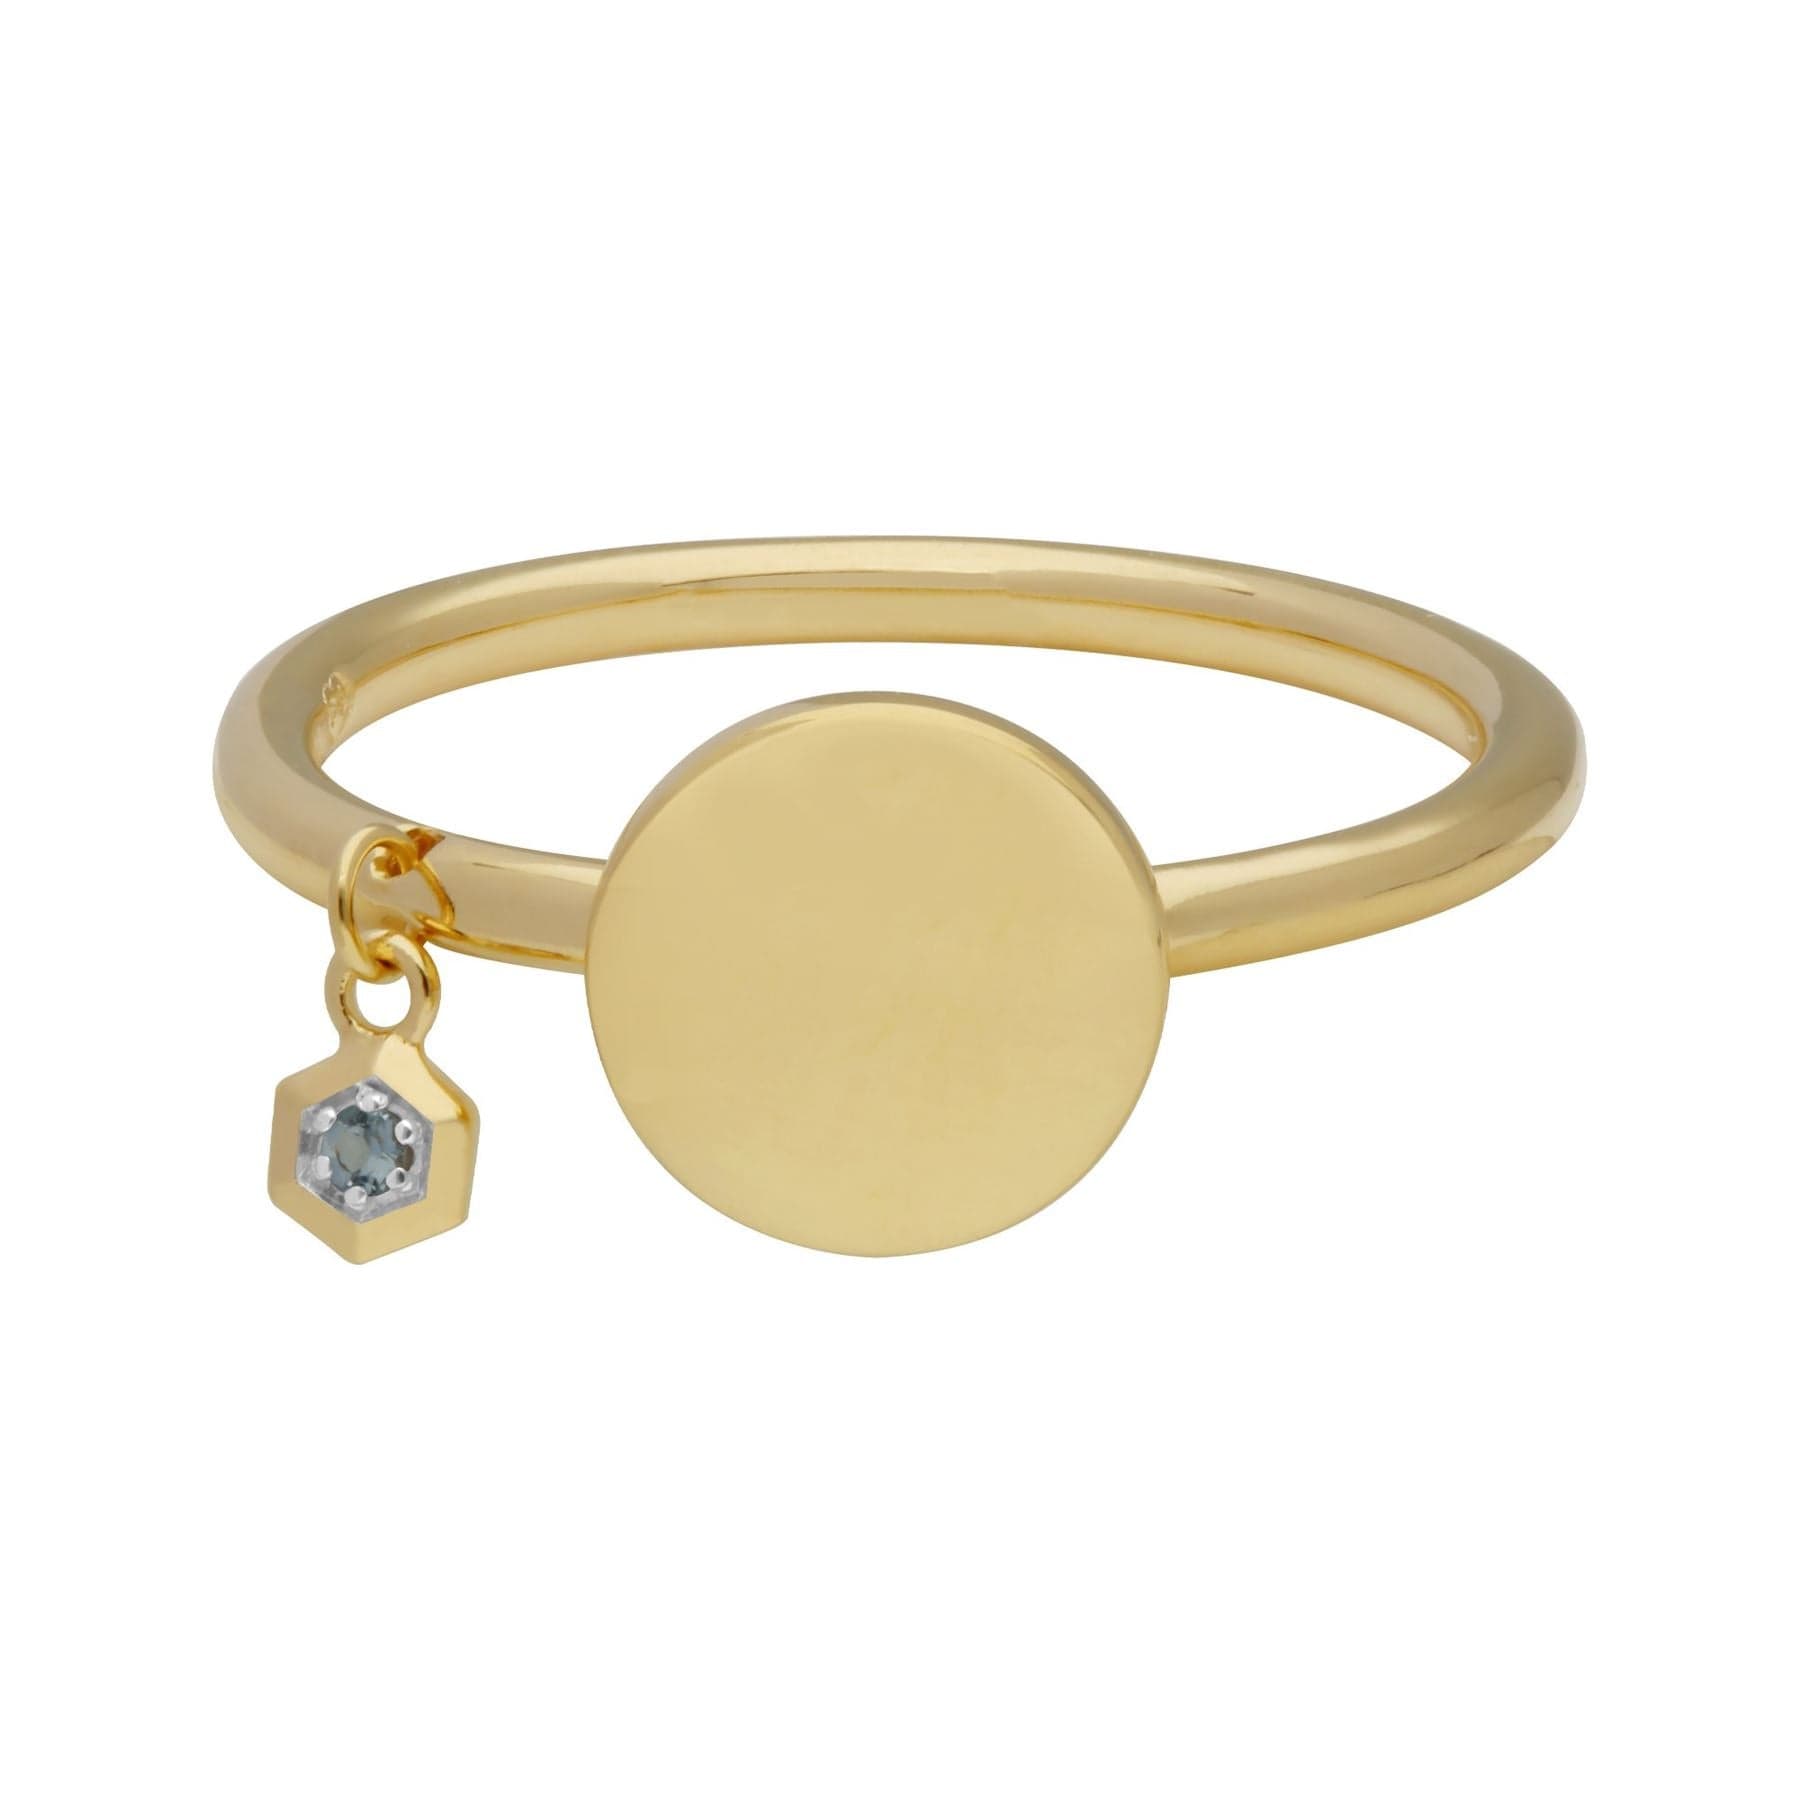 Aquamarine Engravable Ring in Yellow gold Plated Sterling Silver - Gemondo